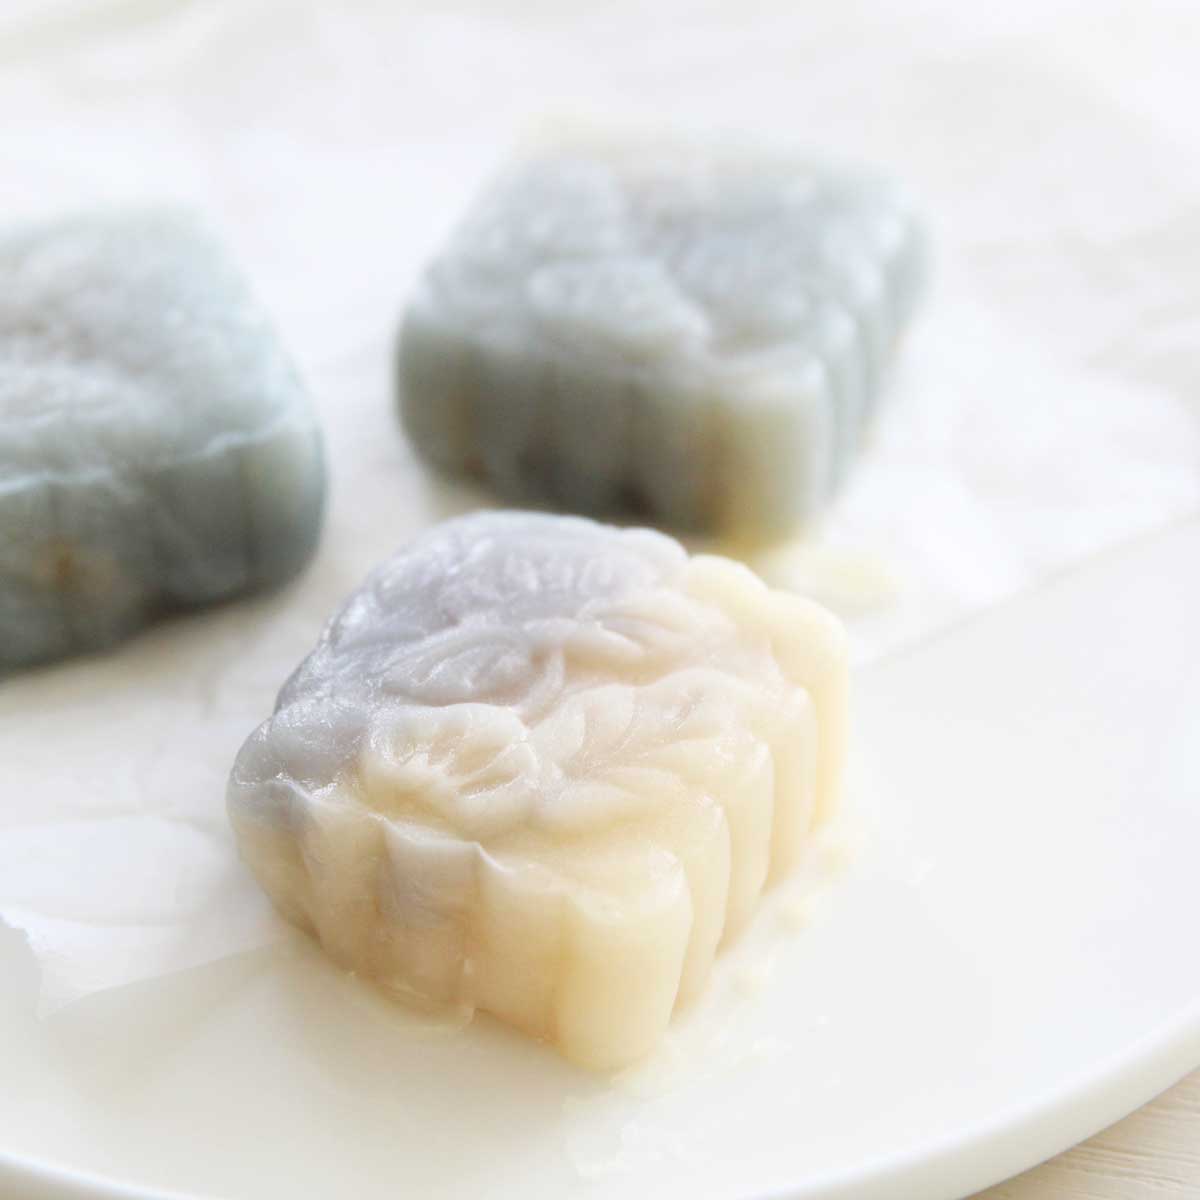 10 Minute Butterfly Pea Snowskin Mooncakes (No Steaming Required!) - mooncakes